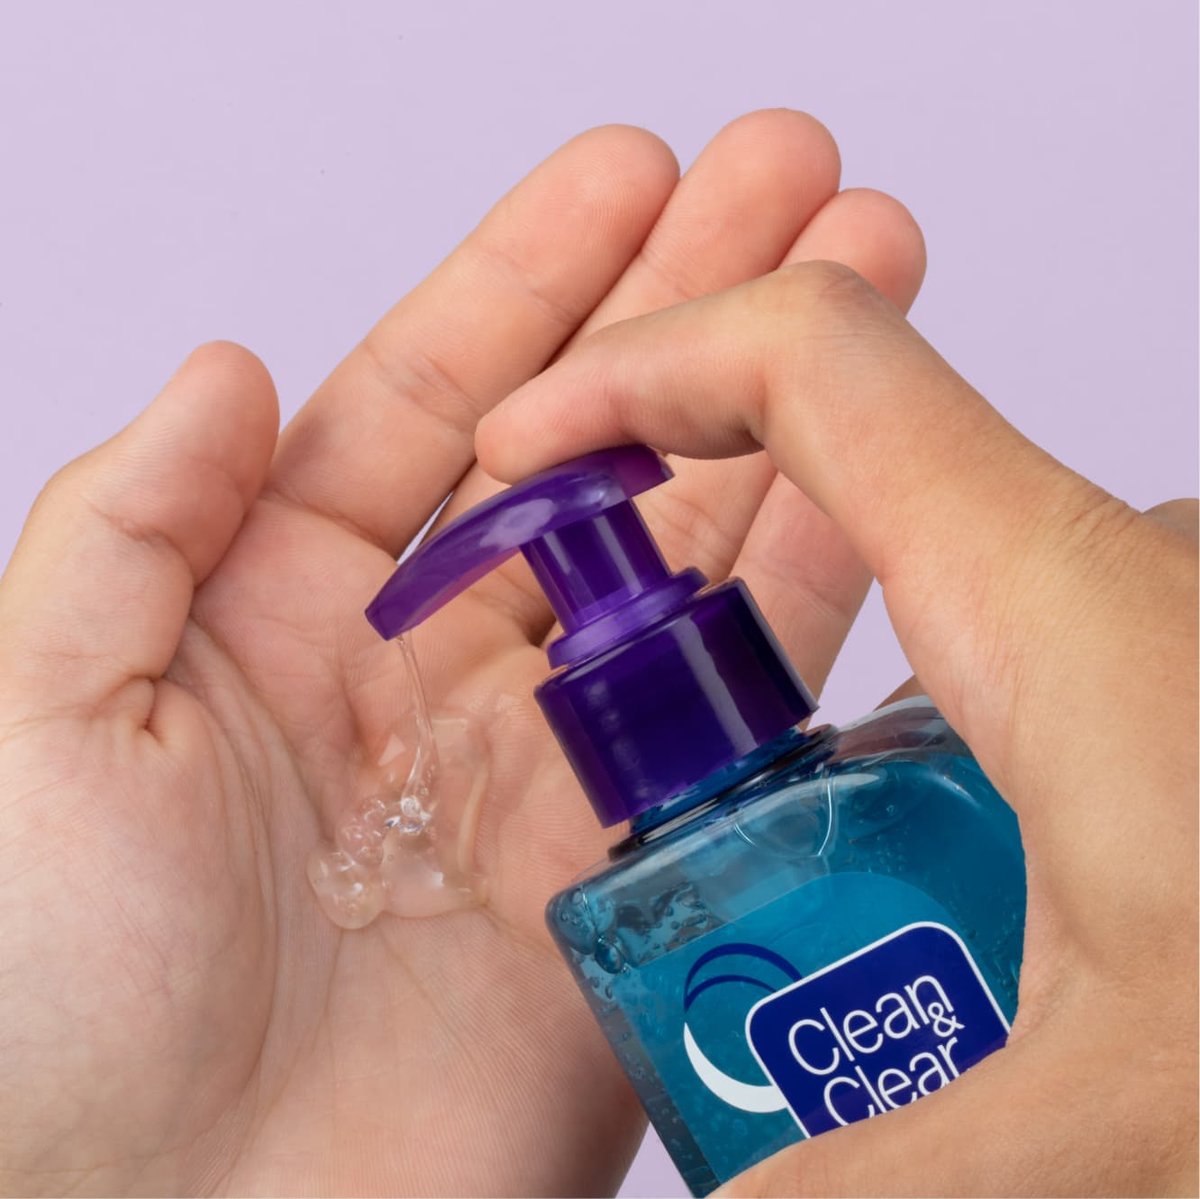 Clear Night Relaxing face wash in blue bottle with purple cap is pumped into palm of hand in front of light purple background